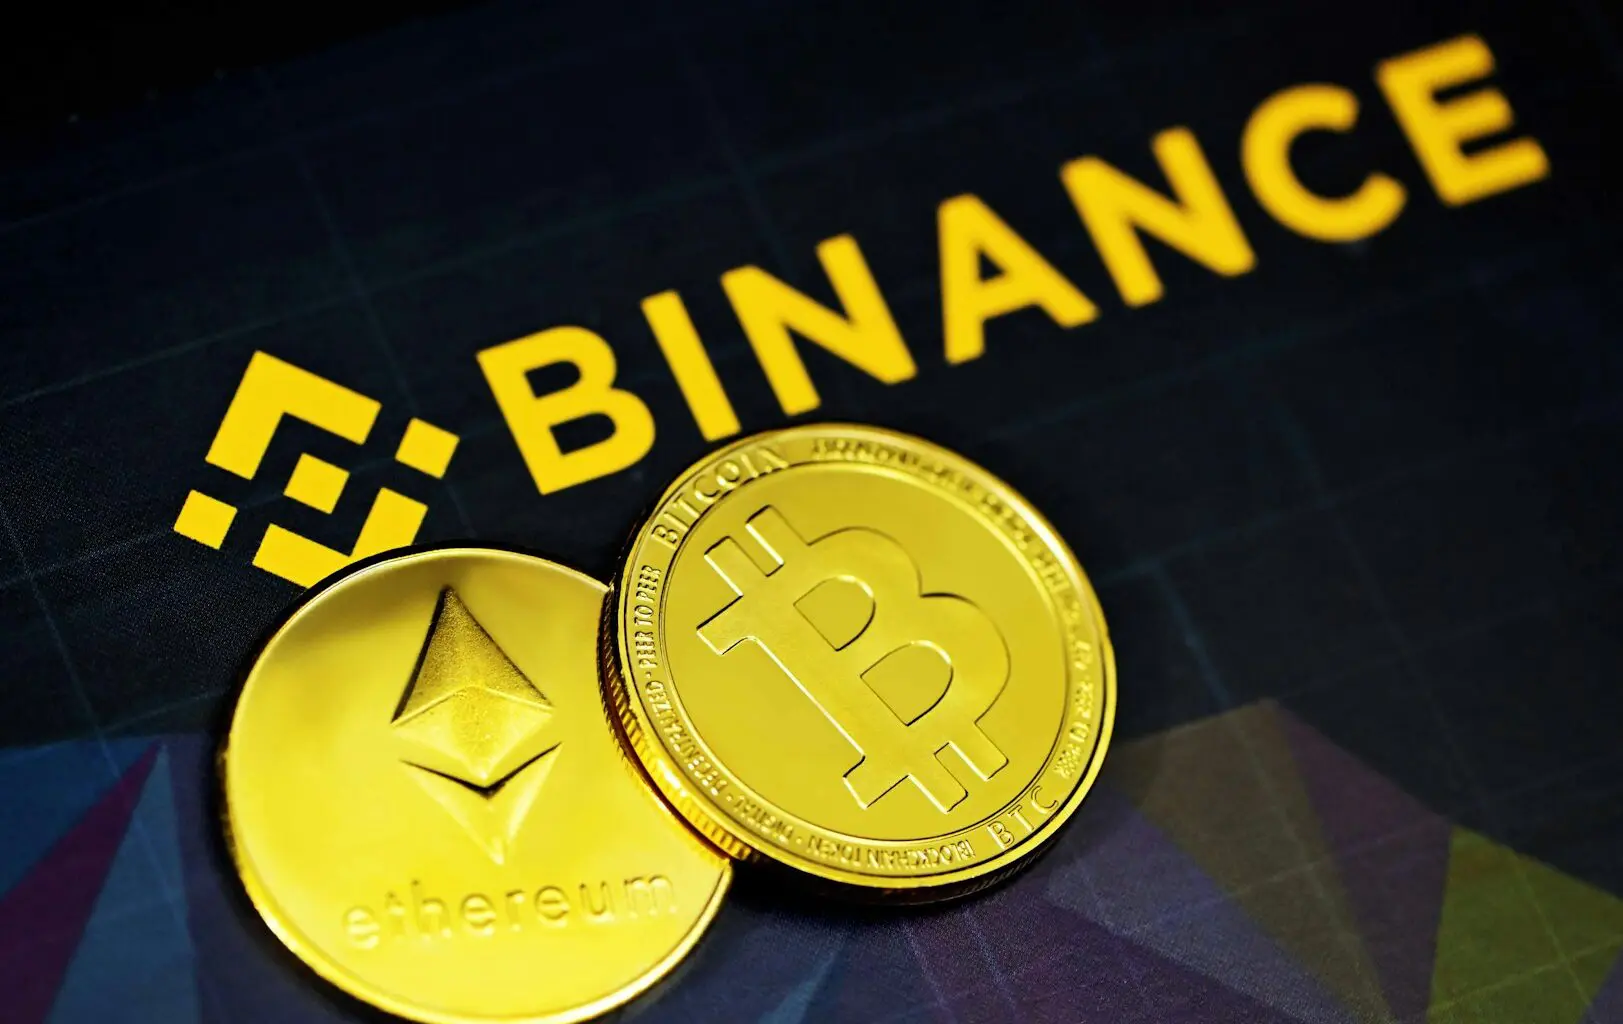 An image of the Binance logo with a physical Bitcoin and Ethereum coin.